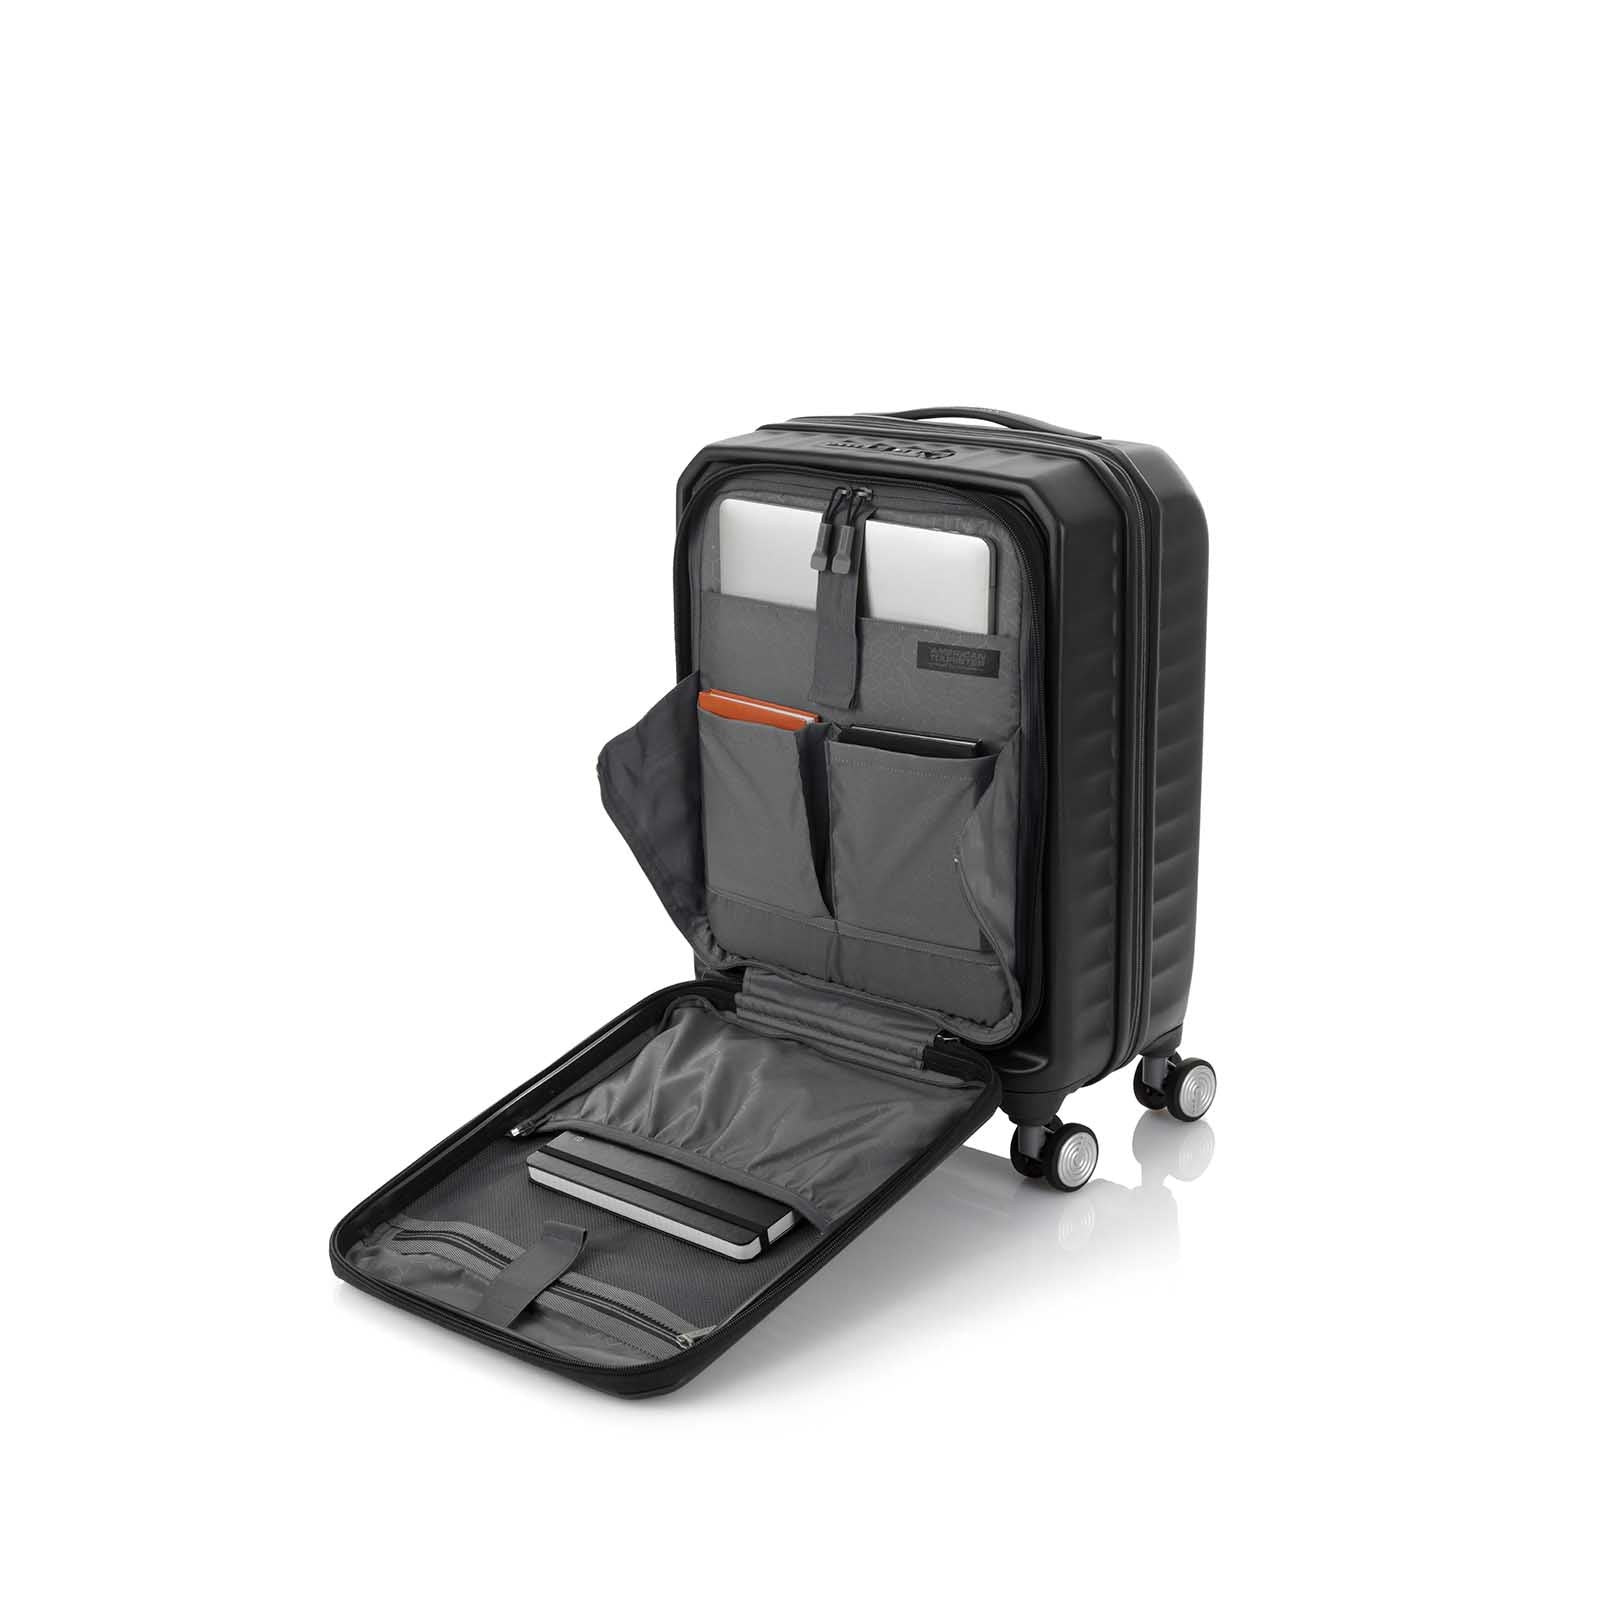 American-Tourister-Frontec-54cm-Suitcase-Jet-Black-Front-Opening